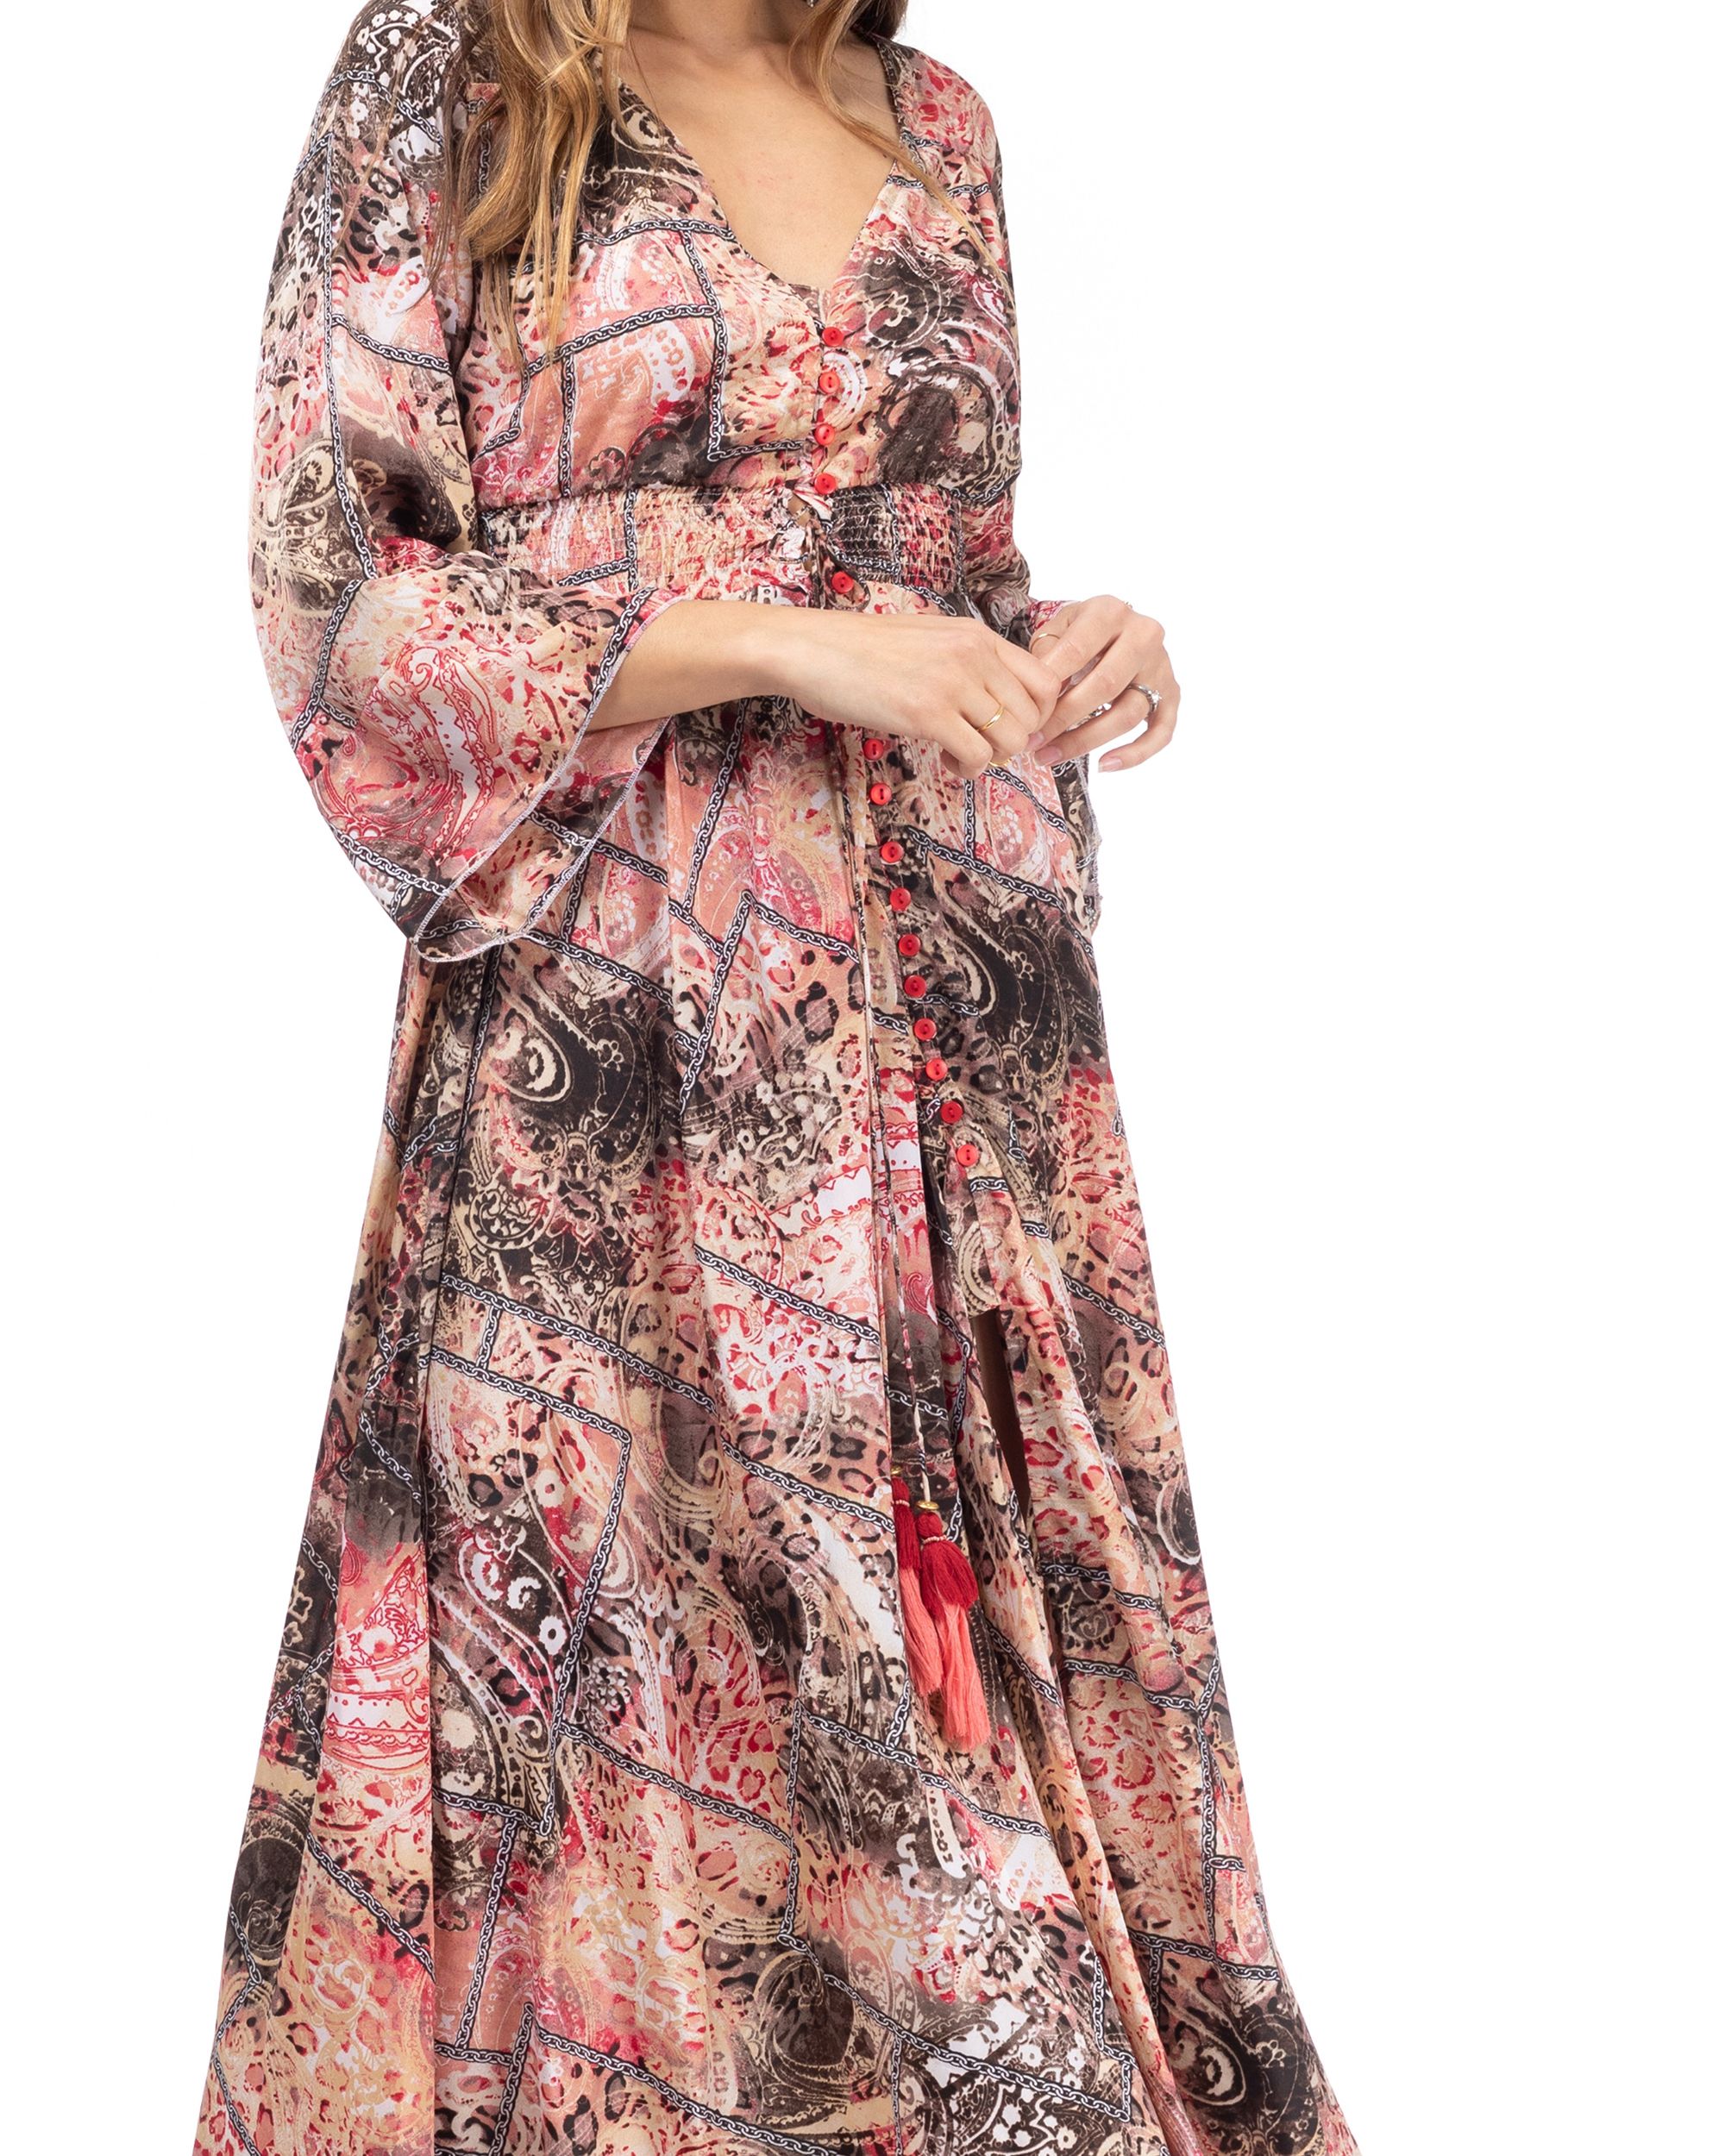 Long printed dress with flared French sleeves, buttons and elastic waist